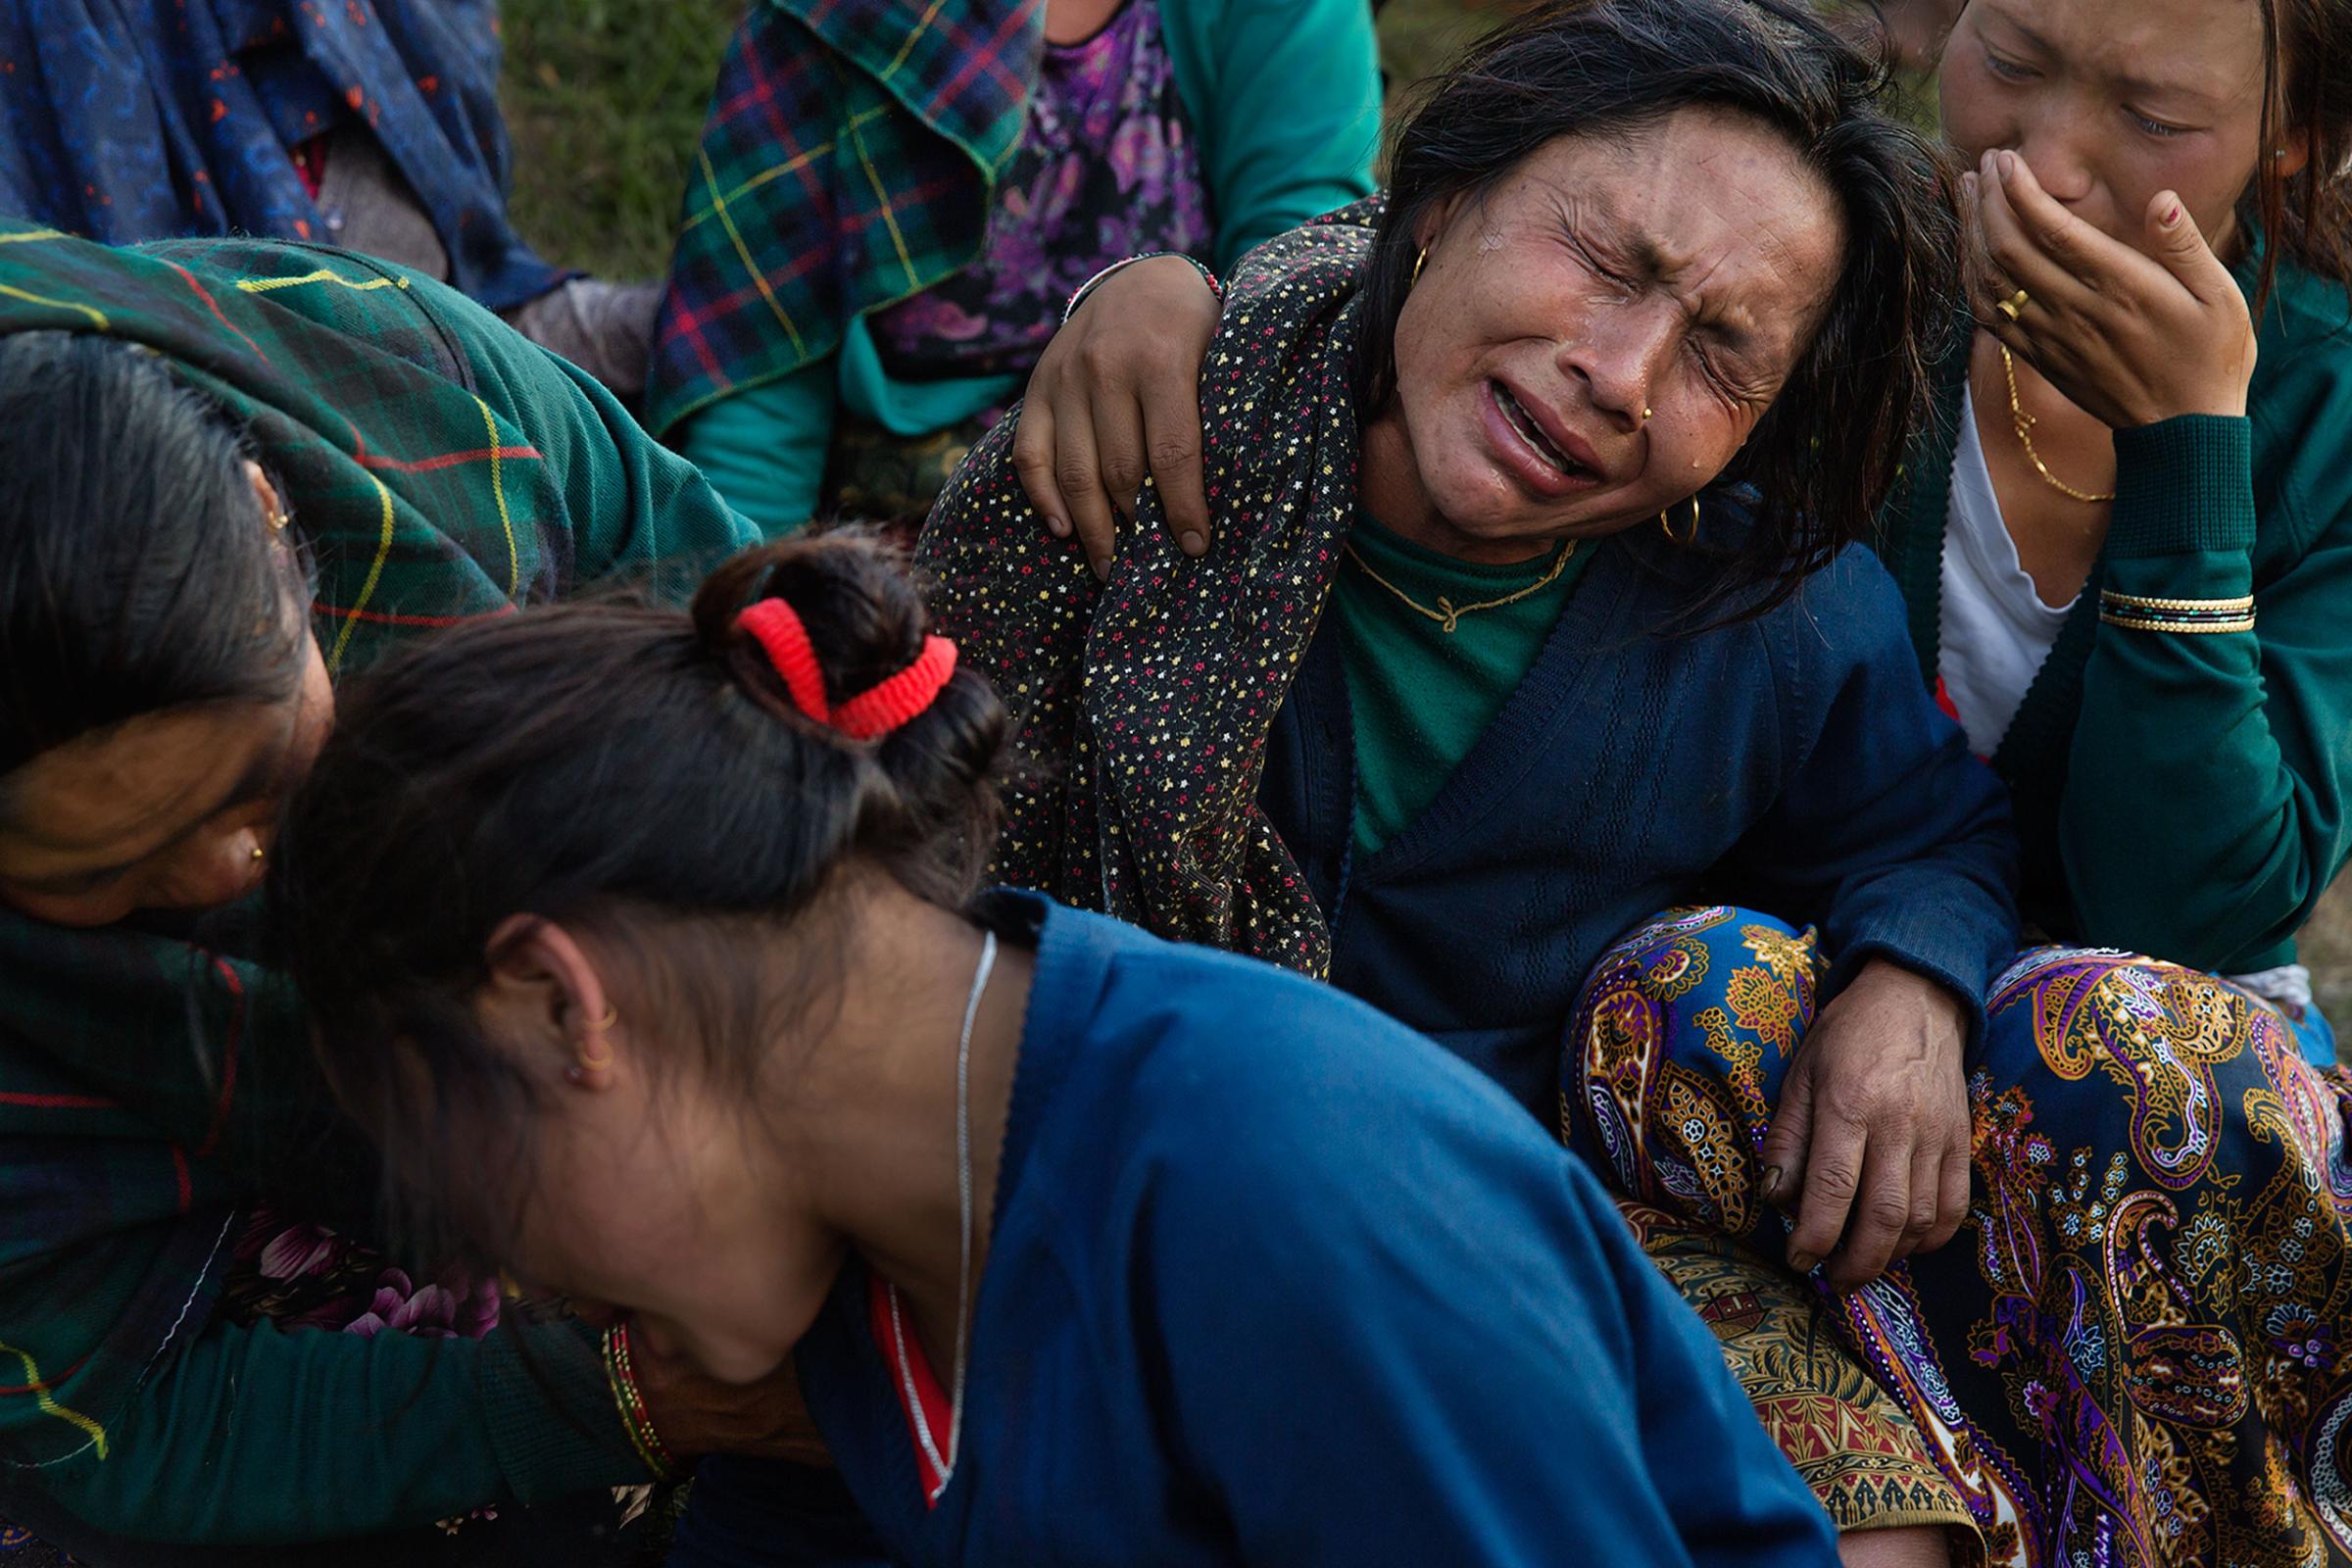 Nepal earthquake. Barpak, the epicenter of the earthquake. Funeral of Pur Bahadur Gurung, 26, who had just been dug out of the rubble. Saainli Gurung, his mother weeping. Scenes of villagers salvaging building materials and personal possessions. Dhan Raj Ghale, 30, dressed in mourning garb after the death of his wite, salvaging buildings materials and possessions from his house. by James Nachtwey